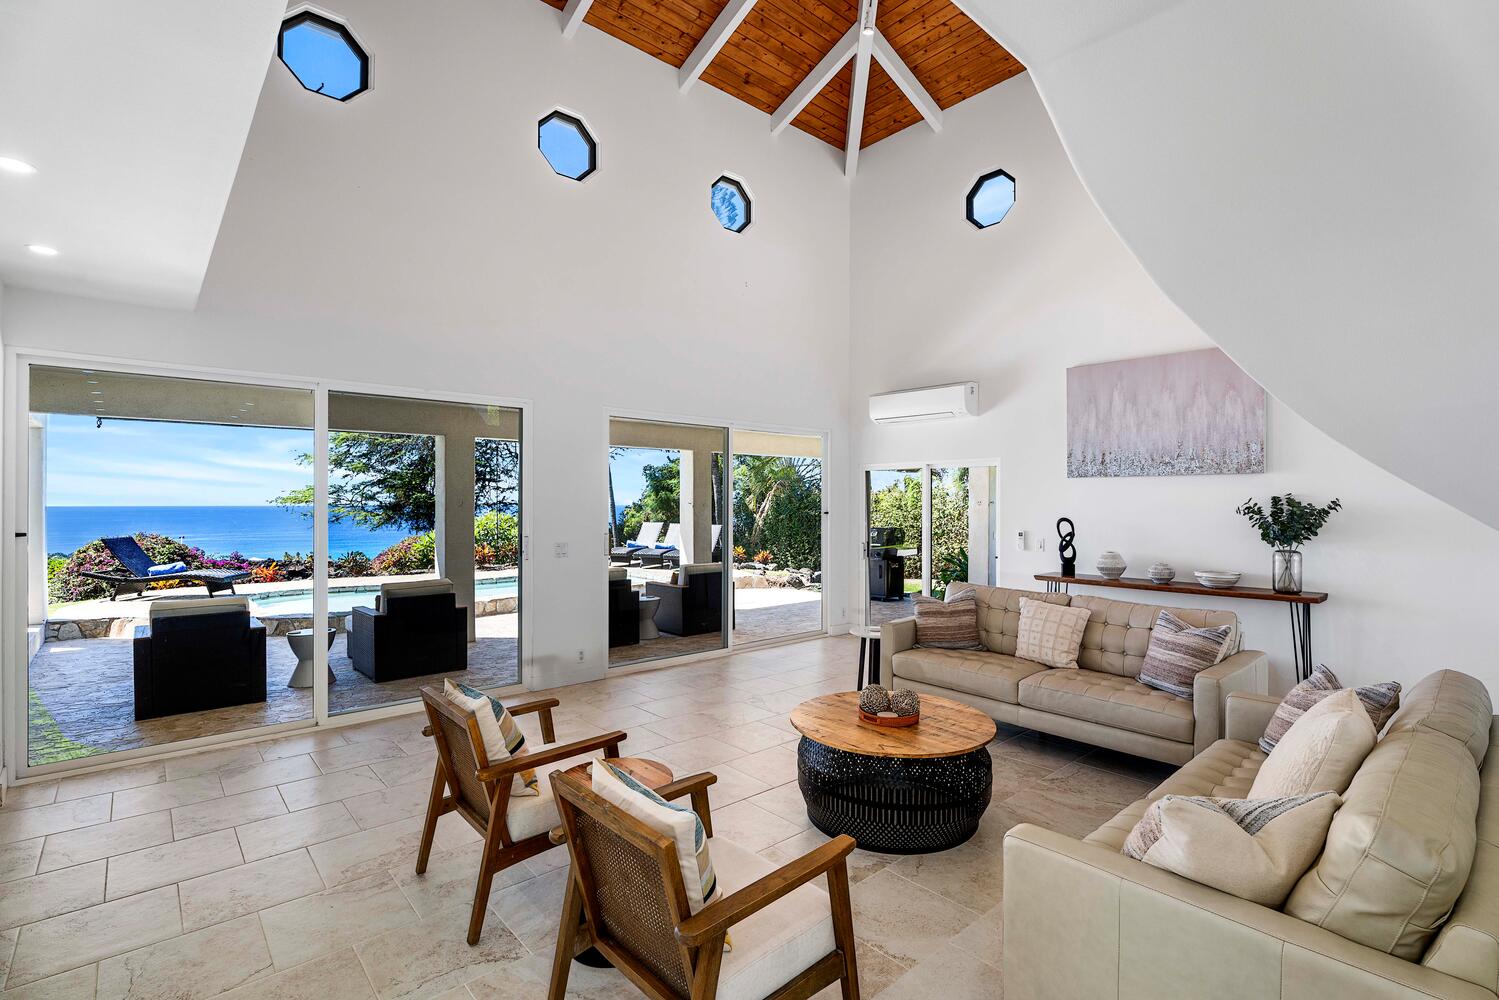 Kailua Kona Vacation Rentals, Ho'okipa Hale - Experience spaciousness and grandeur in the living area, accentuated by soaring vaulted ceilings.